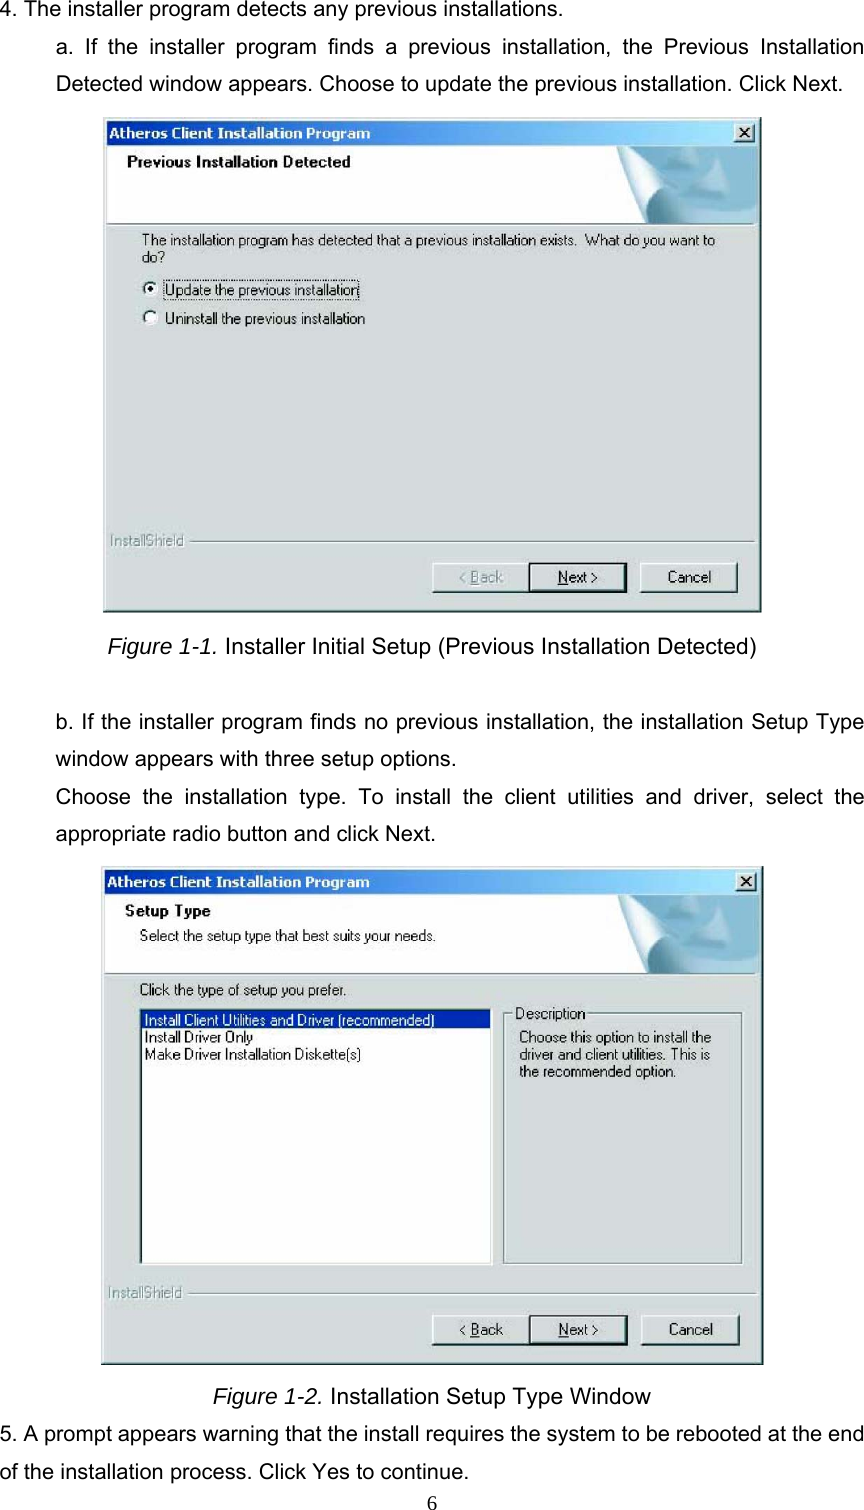 4. The installer program detects any previous installations. a. If the installer program finds a previous installation, the Previous Installation Detected window appears. Choose to update the previous installation. Click Next.  Figure 1-1. Installer Initial Setup (Previous Installation Detected)  b. If the installer program finds no previous installation, the installation Setup Type window appears with three setup options. Choose the installation type. To install the client utilities and driver, select the appropriate radio button and click Next.  Figure 1-2. Installation Setup Type Window 5. A prompt appears warning that the install requires the system to be rebooted at the end of the installation process. Click Yes to continue.  6